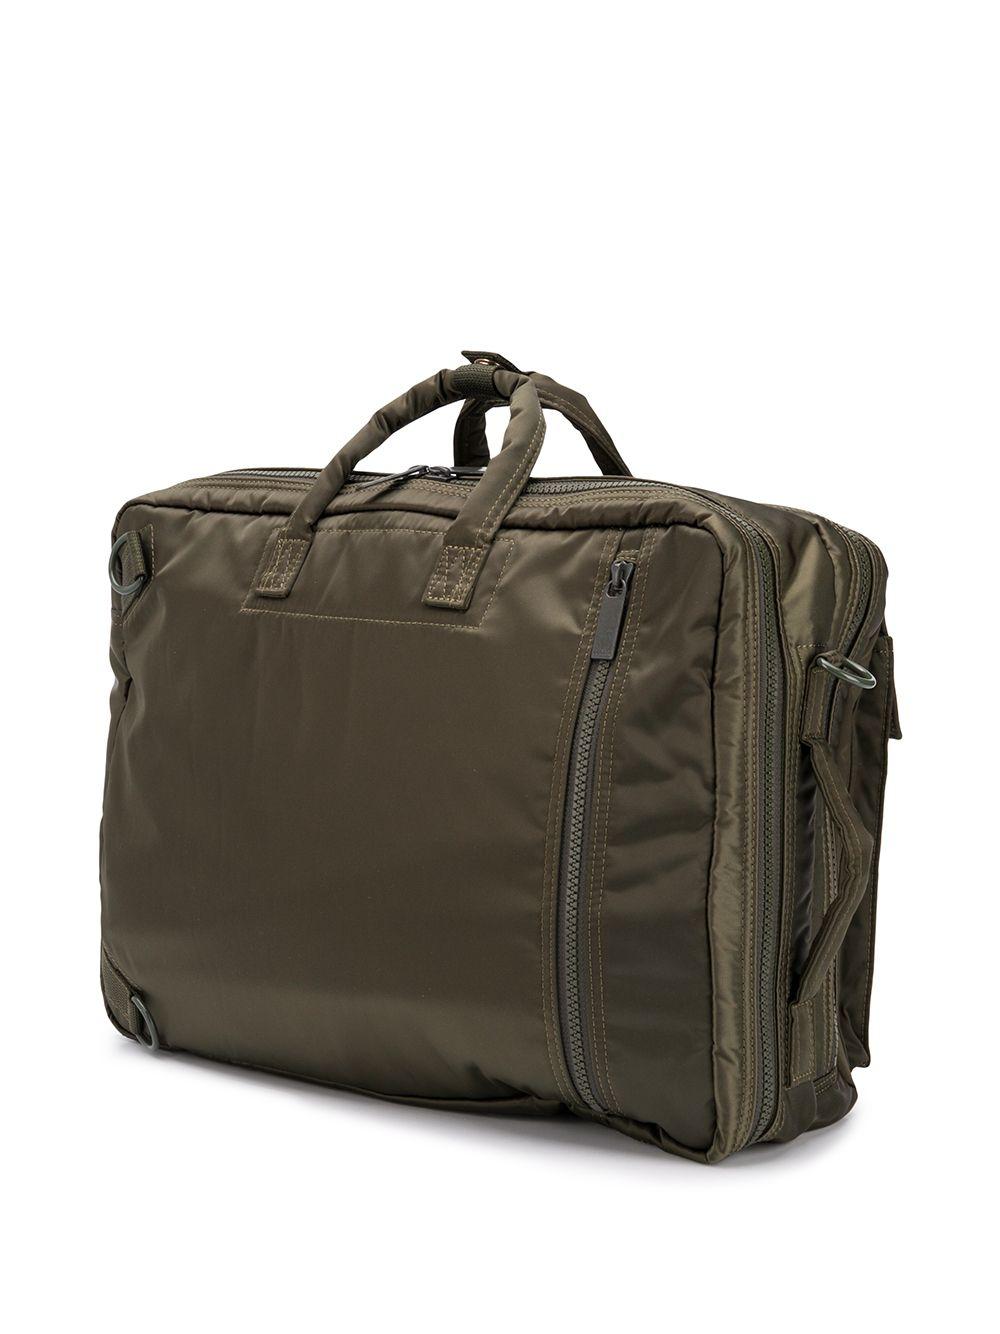 Porter-Yoshida and Co X Porter 3-way Briefcase in Green | Lyst